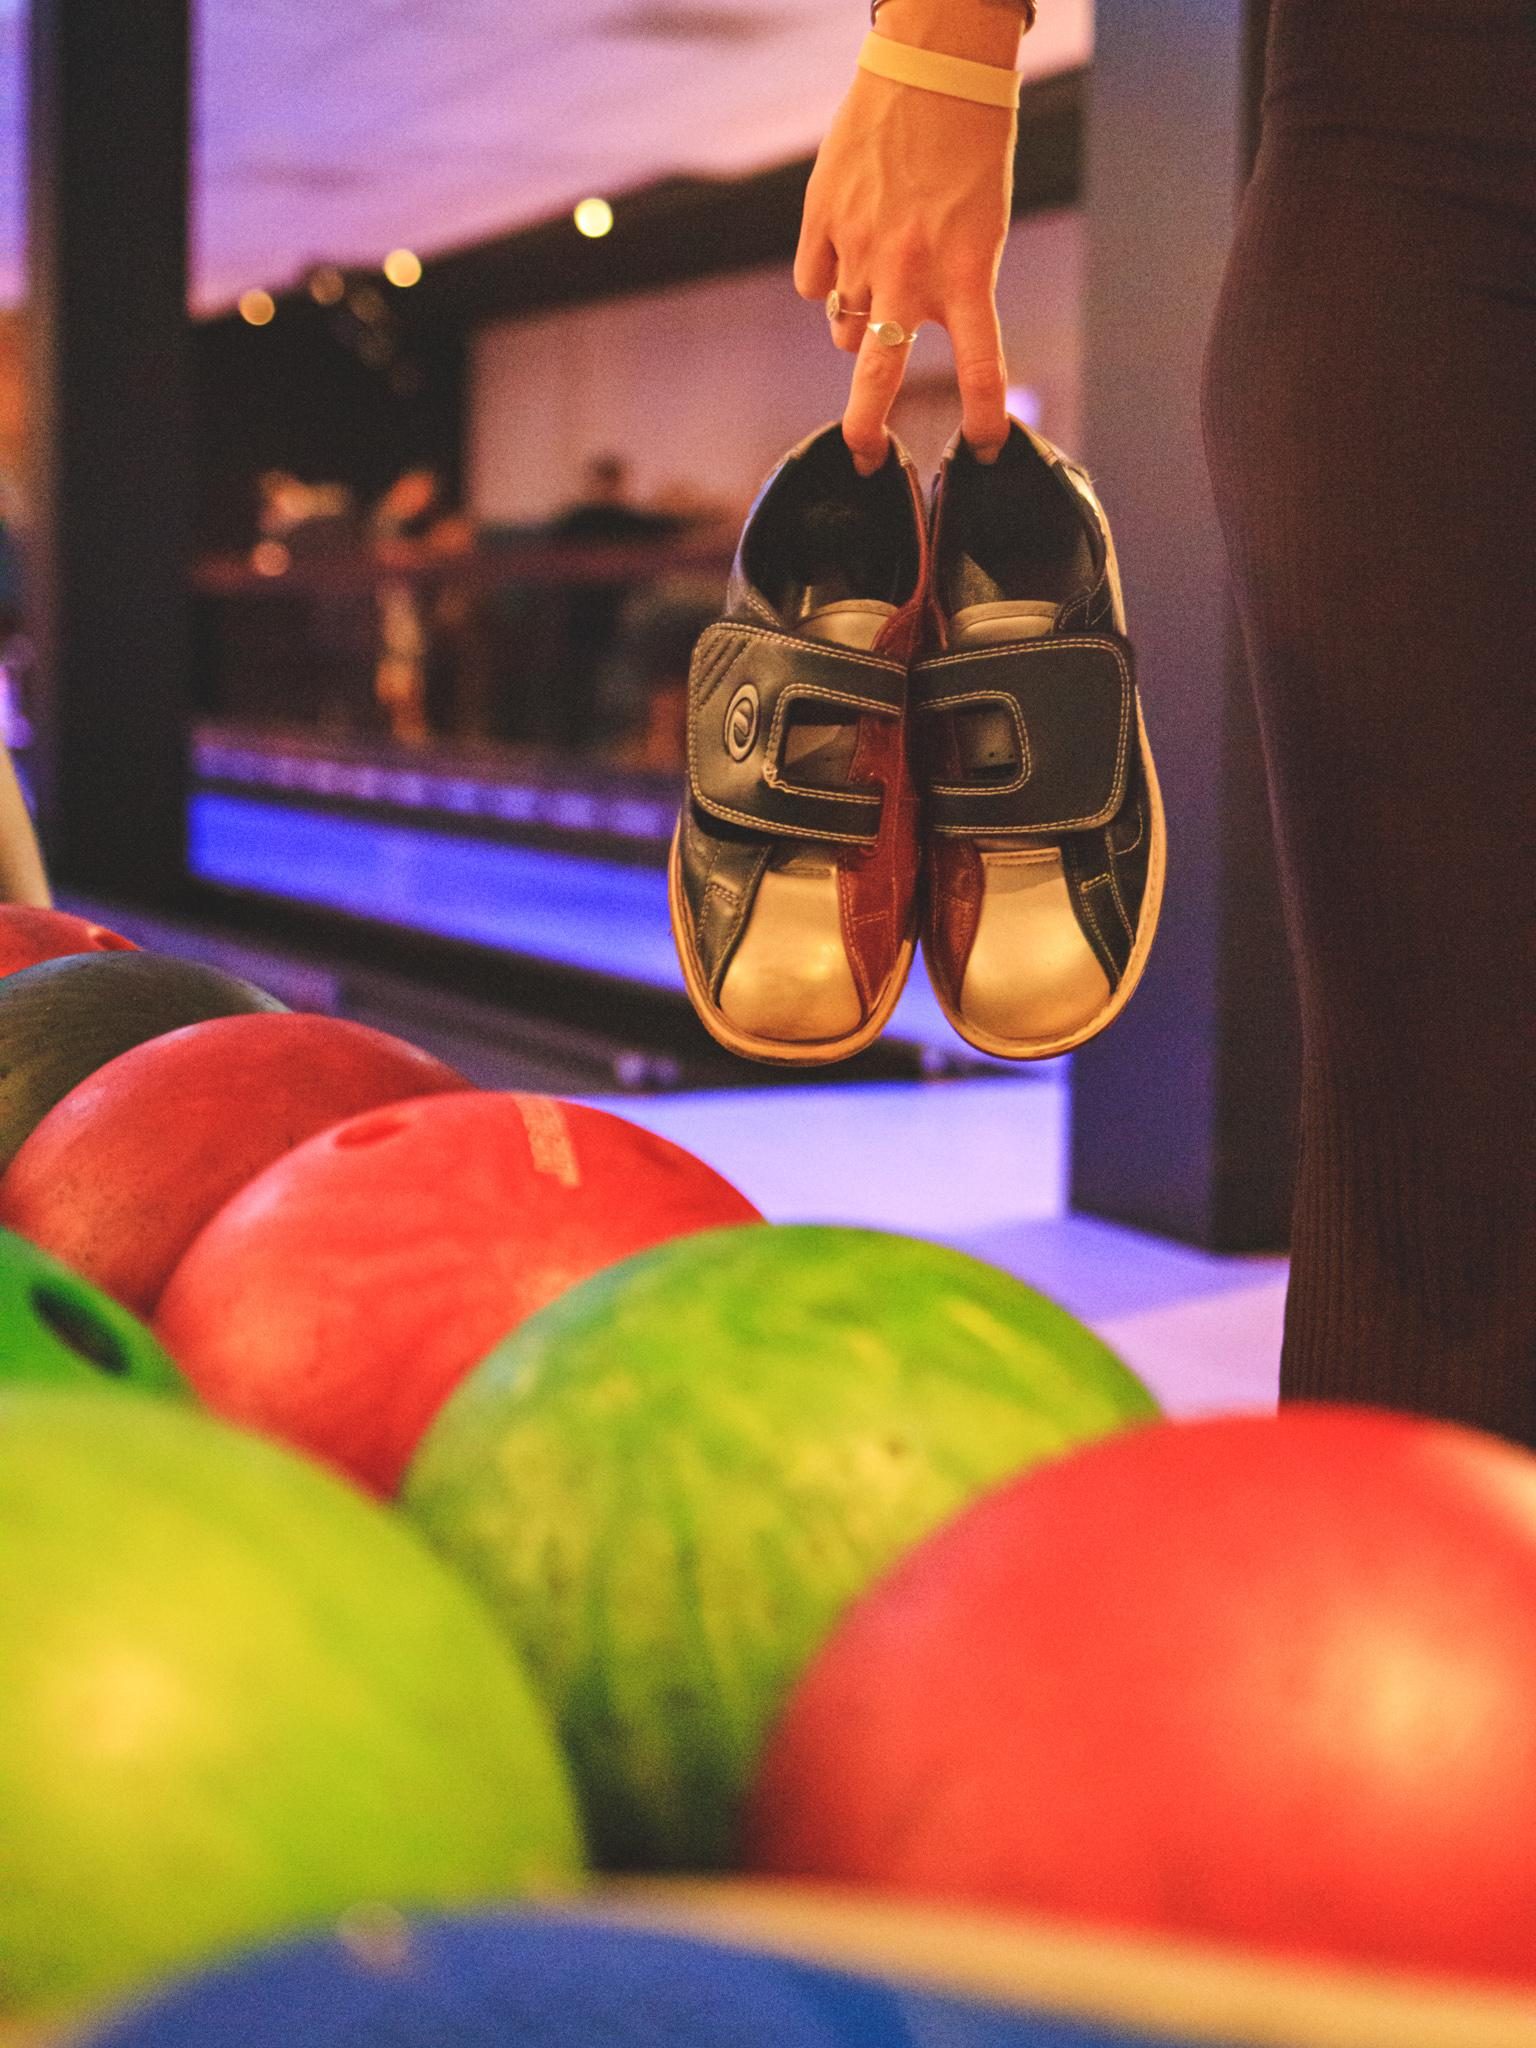 Bowling or XL games with dinner